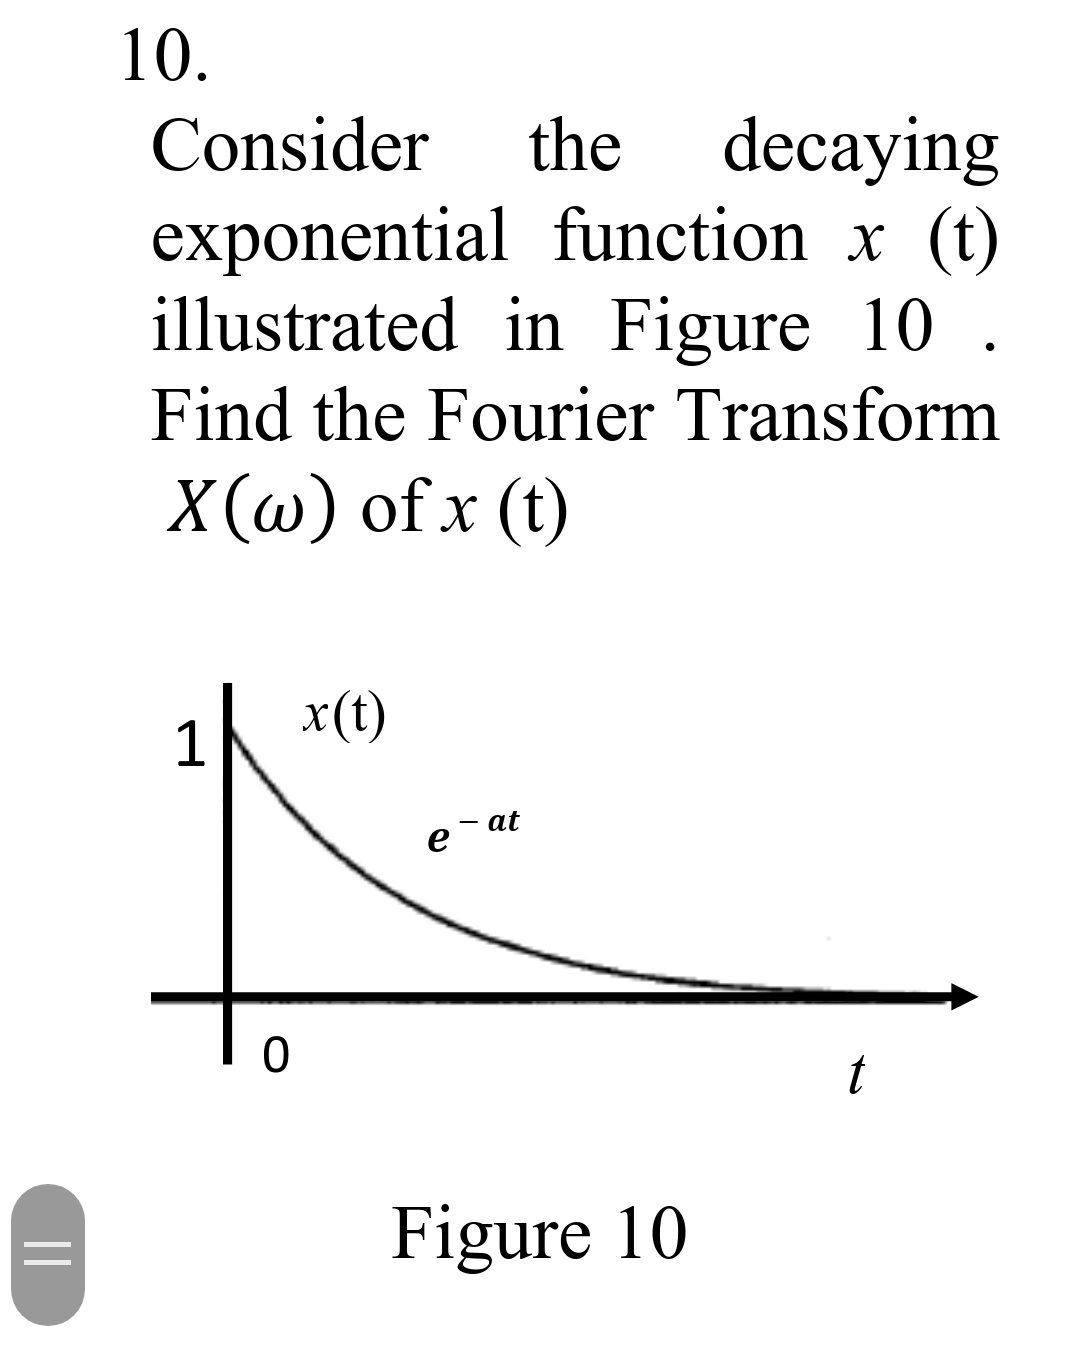 ||
10.
Consider
the decaying
exponential function x (t)
illustrated in Figure 10 .
Find the Fourier Transform
X(w) of x (t)
0
x (t)
e
at
Figure 10
t